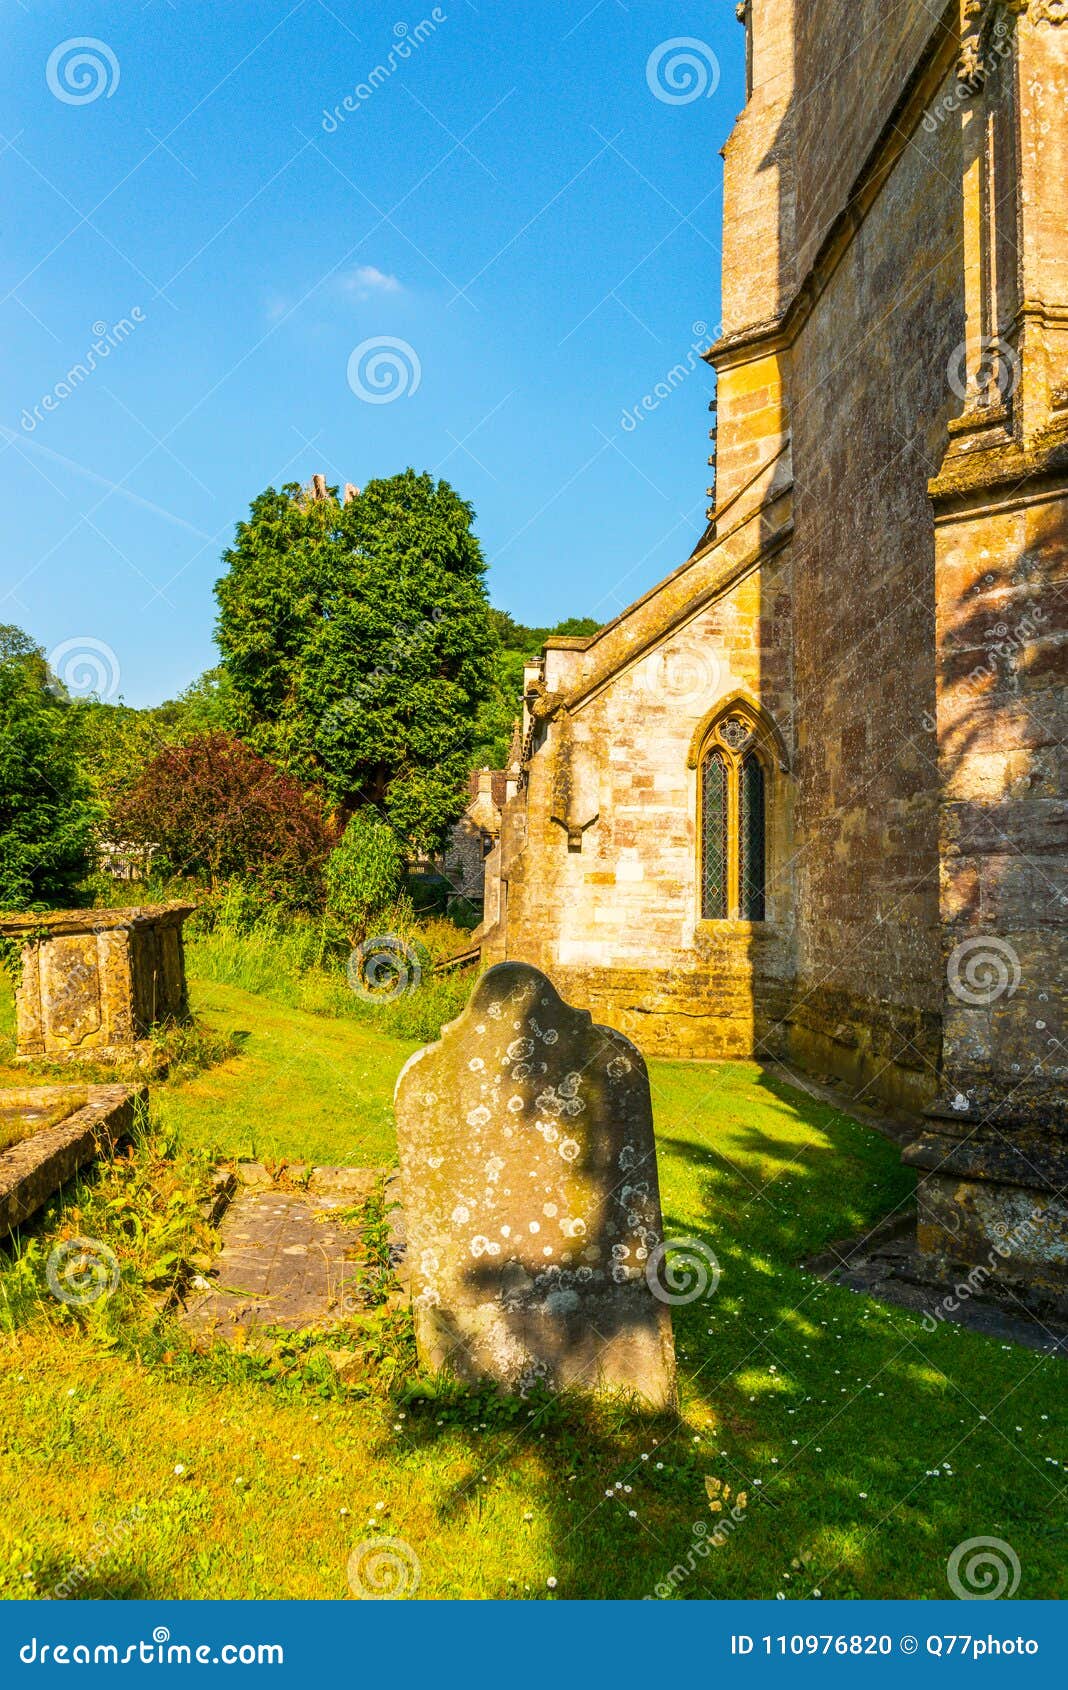 old-medieval-english-cemetery-gravestones-typical-old-british-stock-photo-image-of-quiet